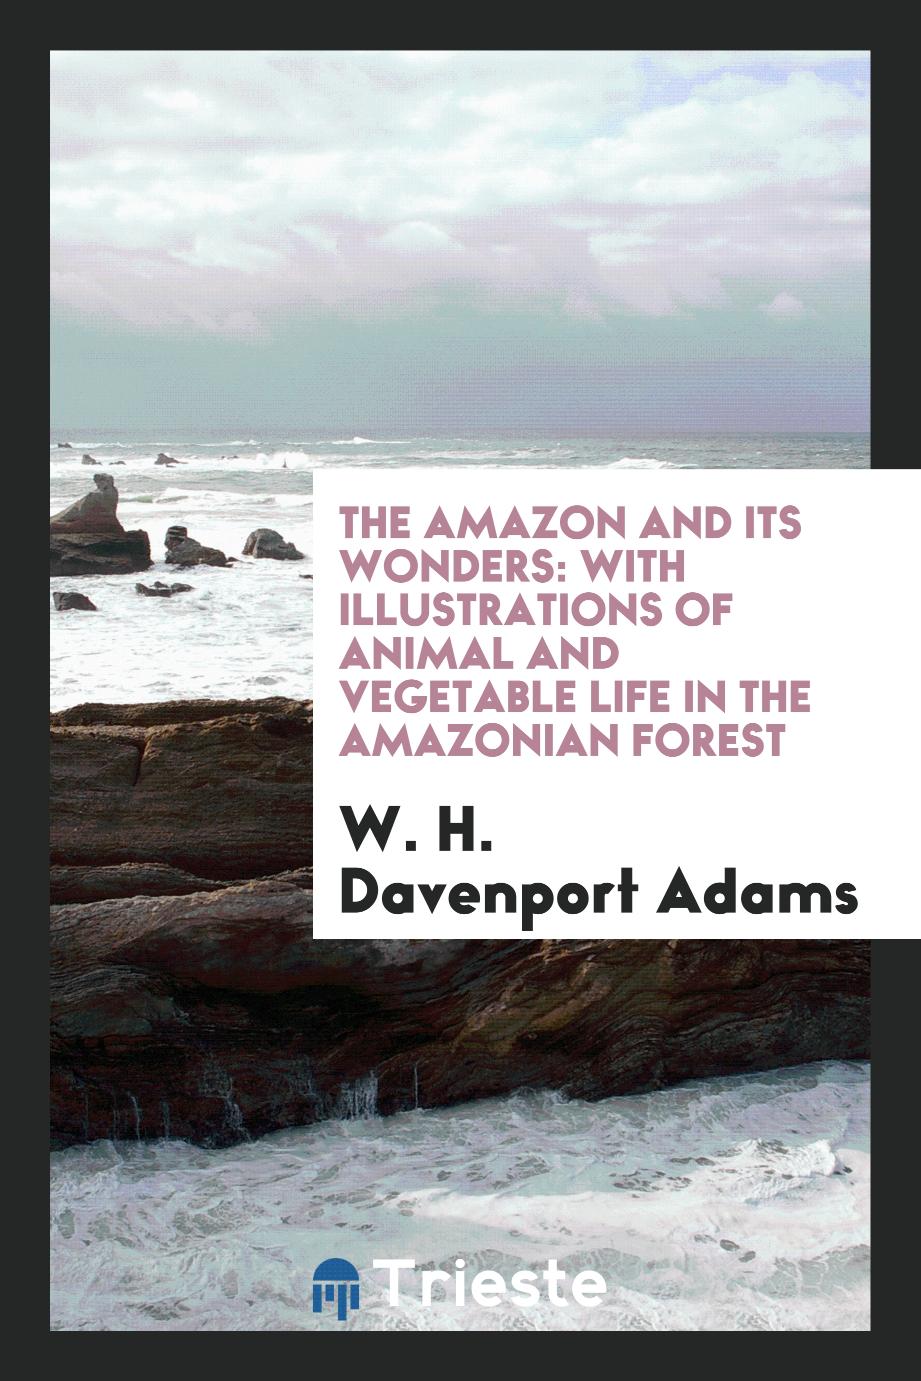 The Amazon and its wonders: with illustrations of animal and vegetable life in the Amazonian Forest